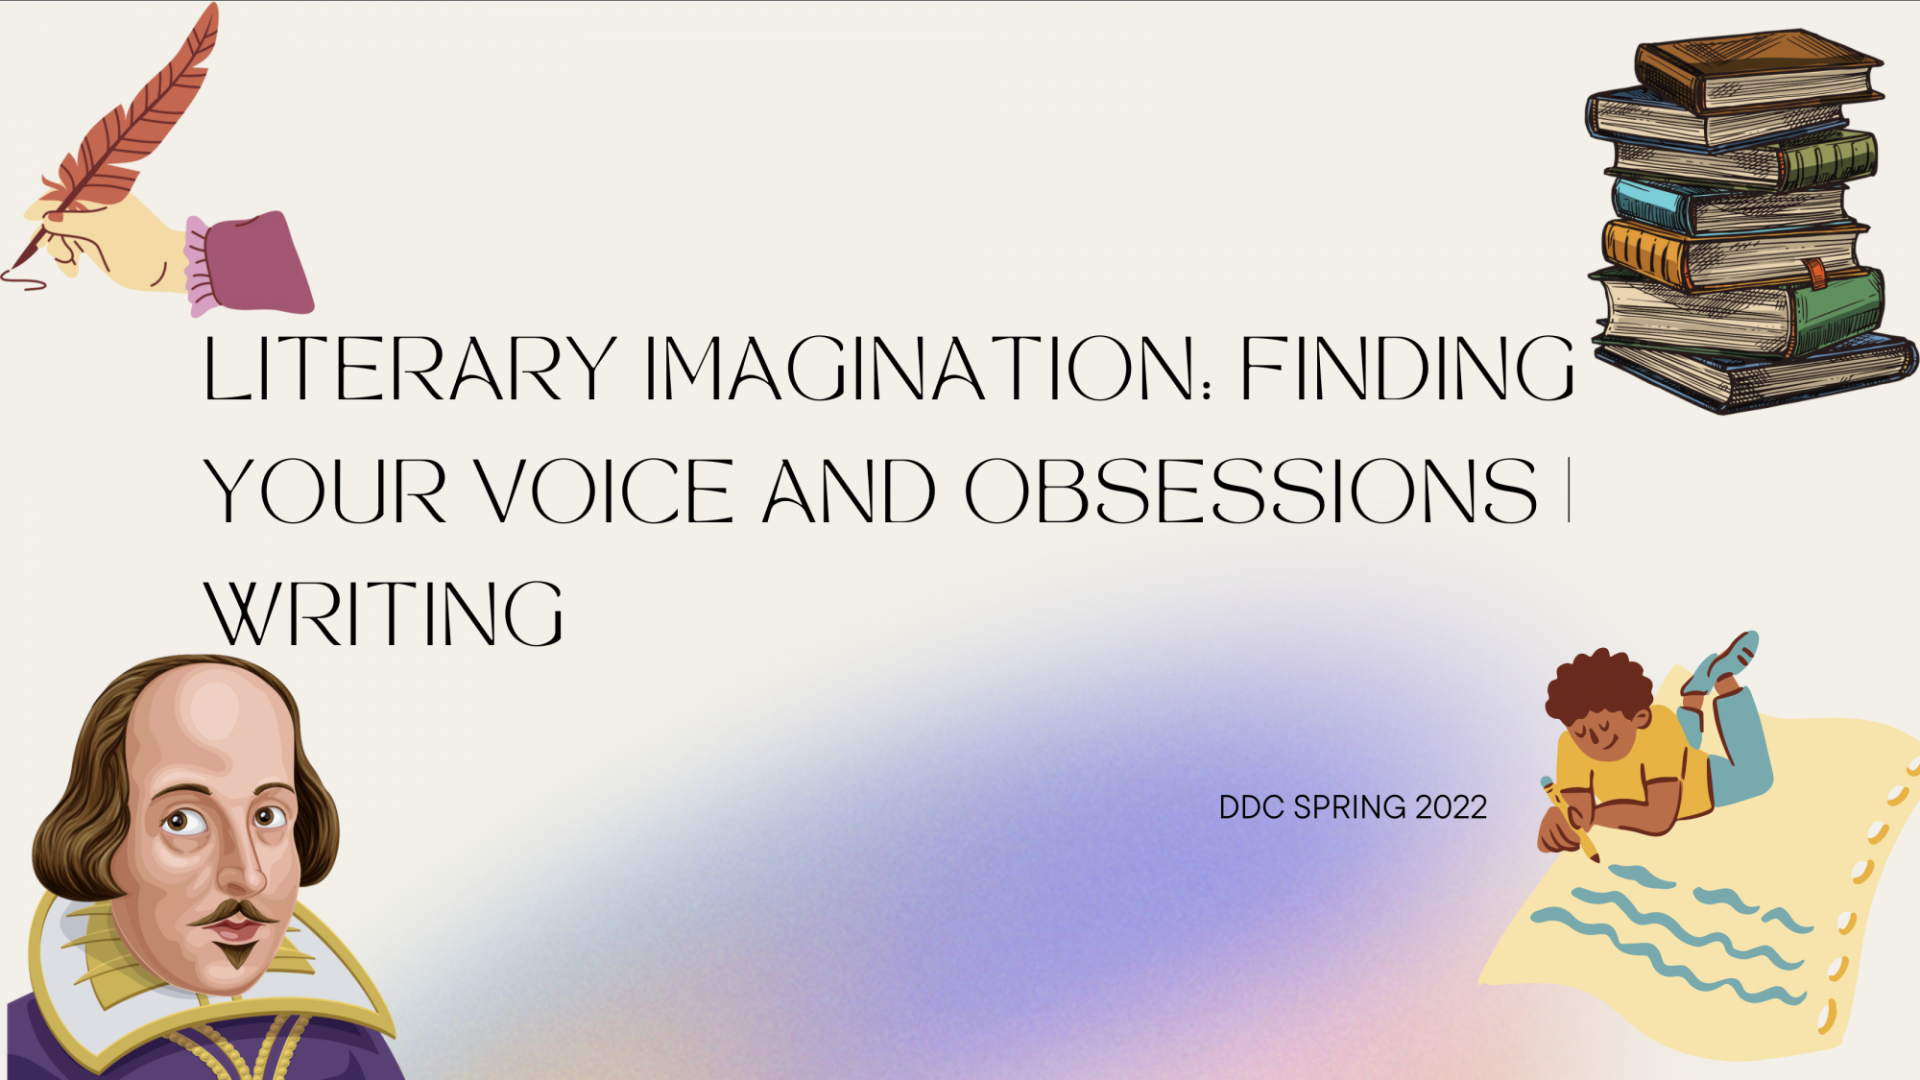 Literary imagination: finding your voice and obsessions - writing course listing slide